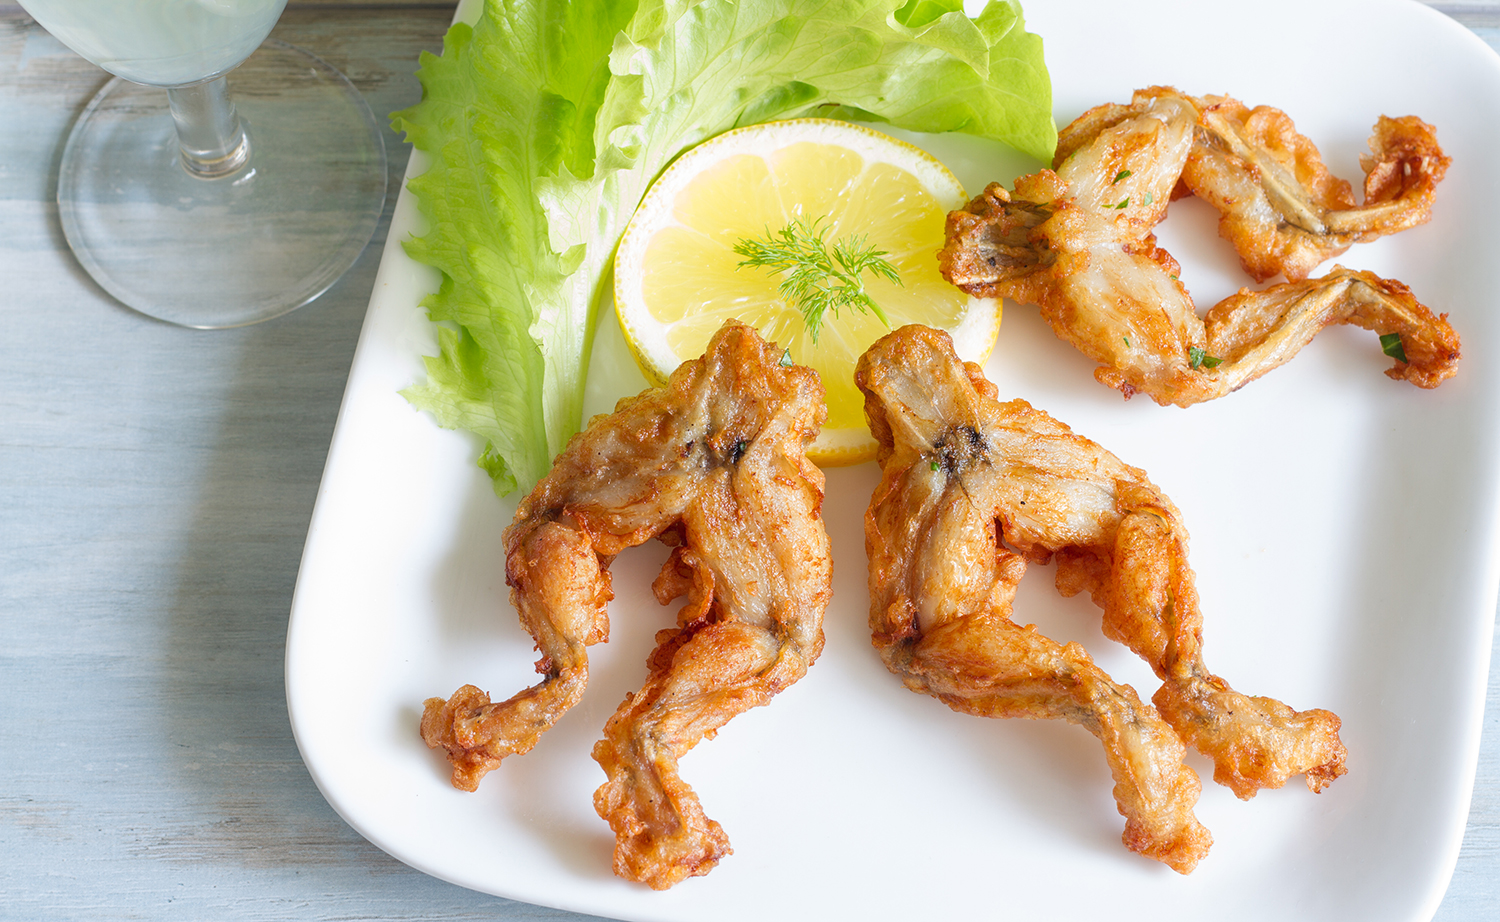 Fried Frog Legs  Traditional Frog Dish From New Orleans, United States of  America